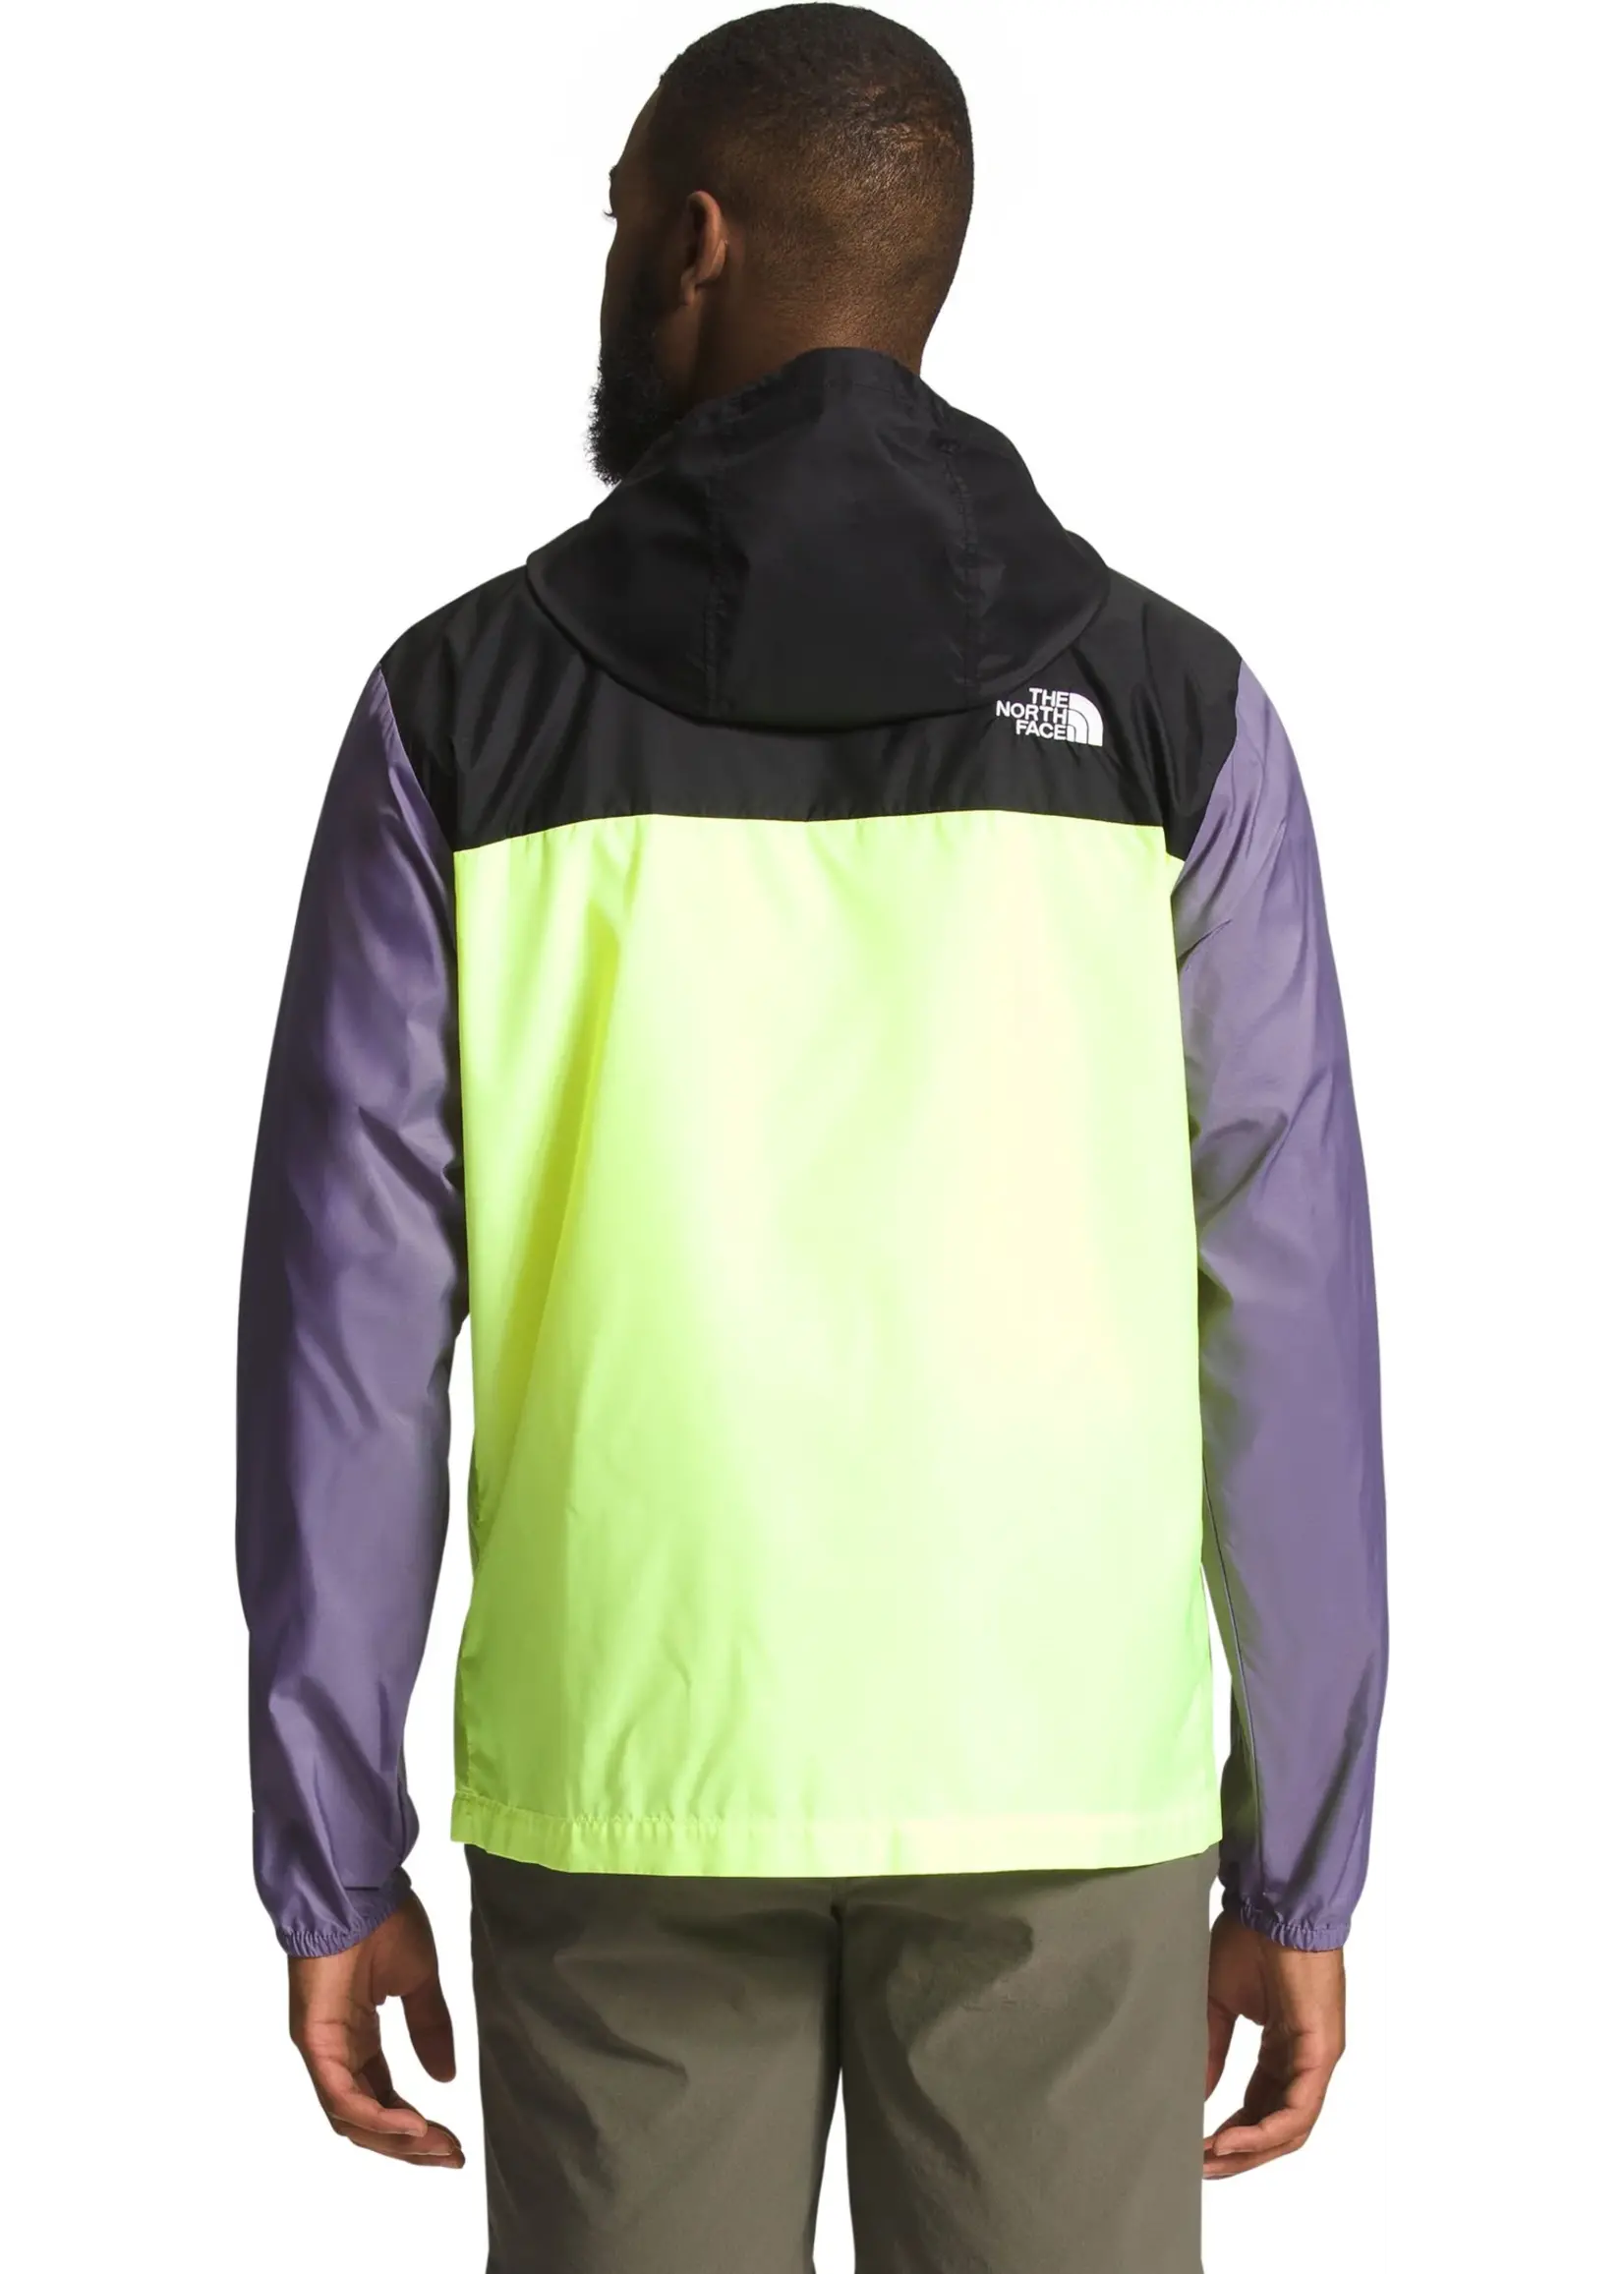 North Face North Face M's Cyclone Jacket 3